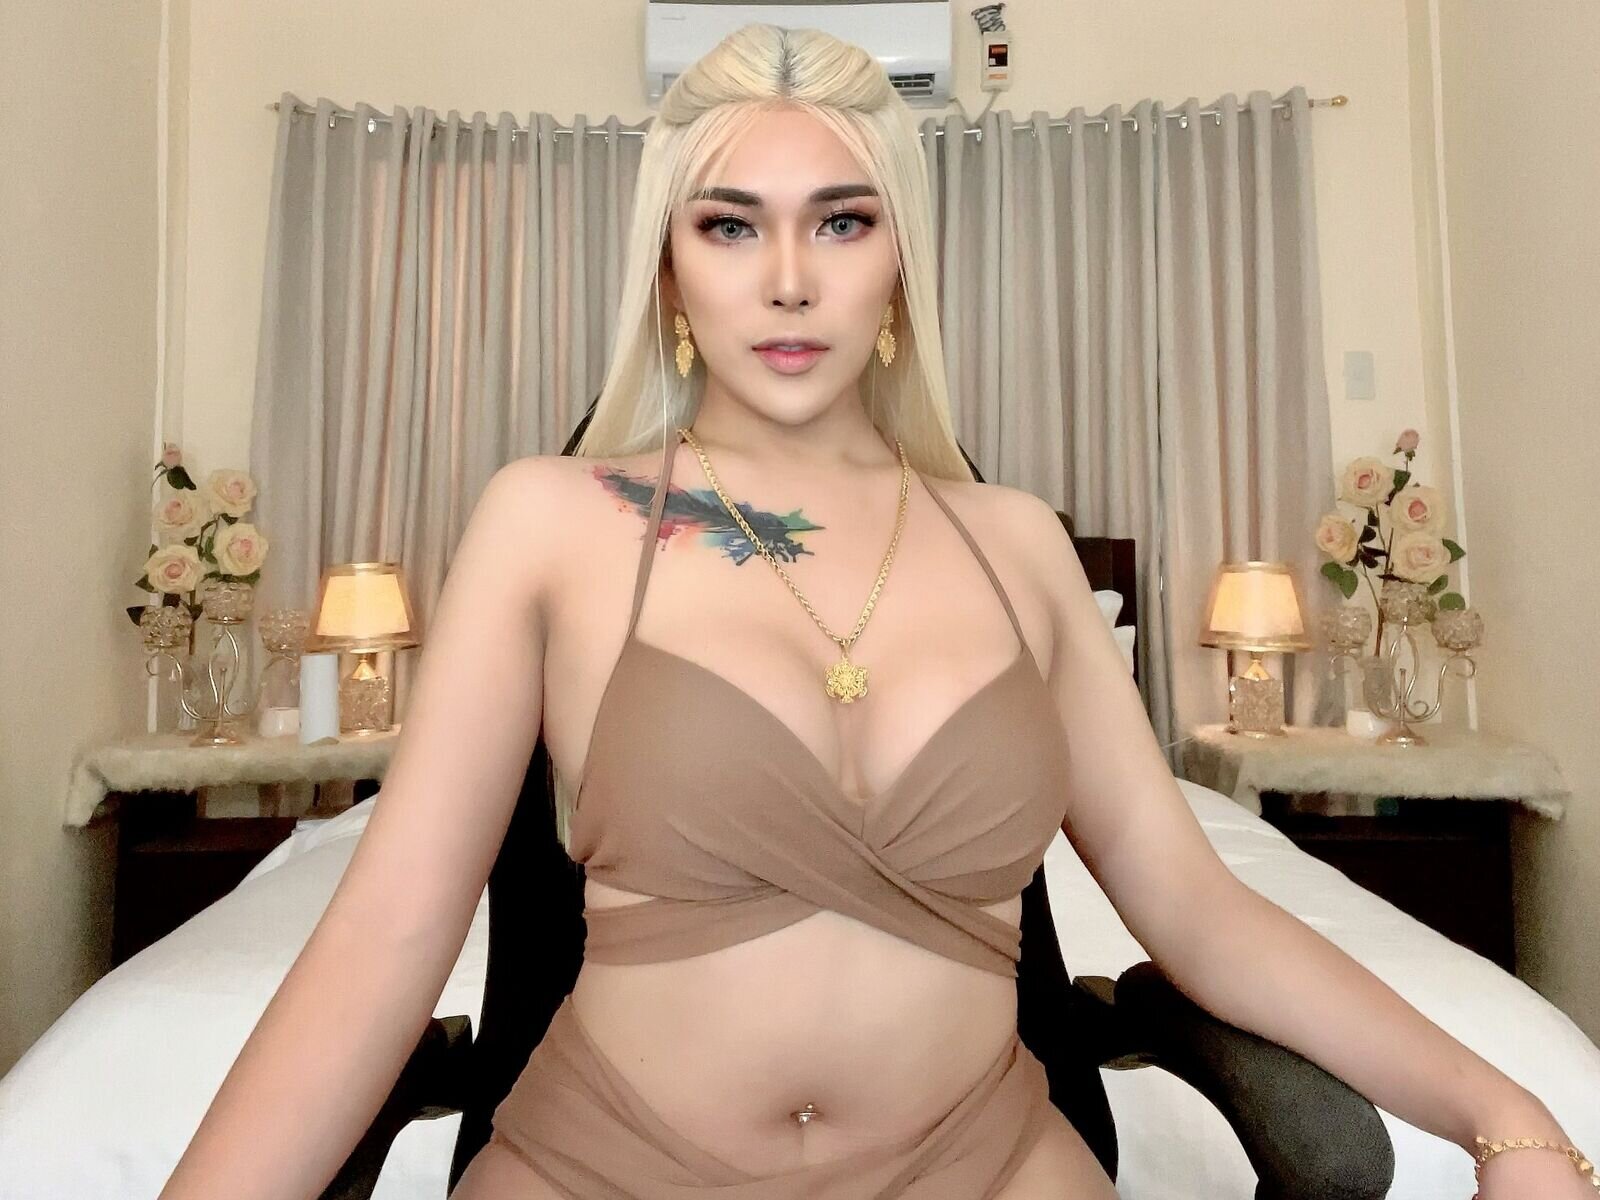 Free Live Sex Chat With MargaritaMaelsa